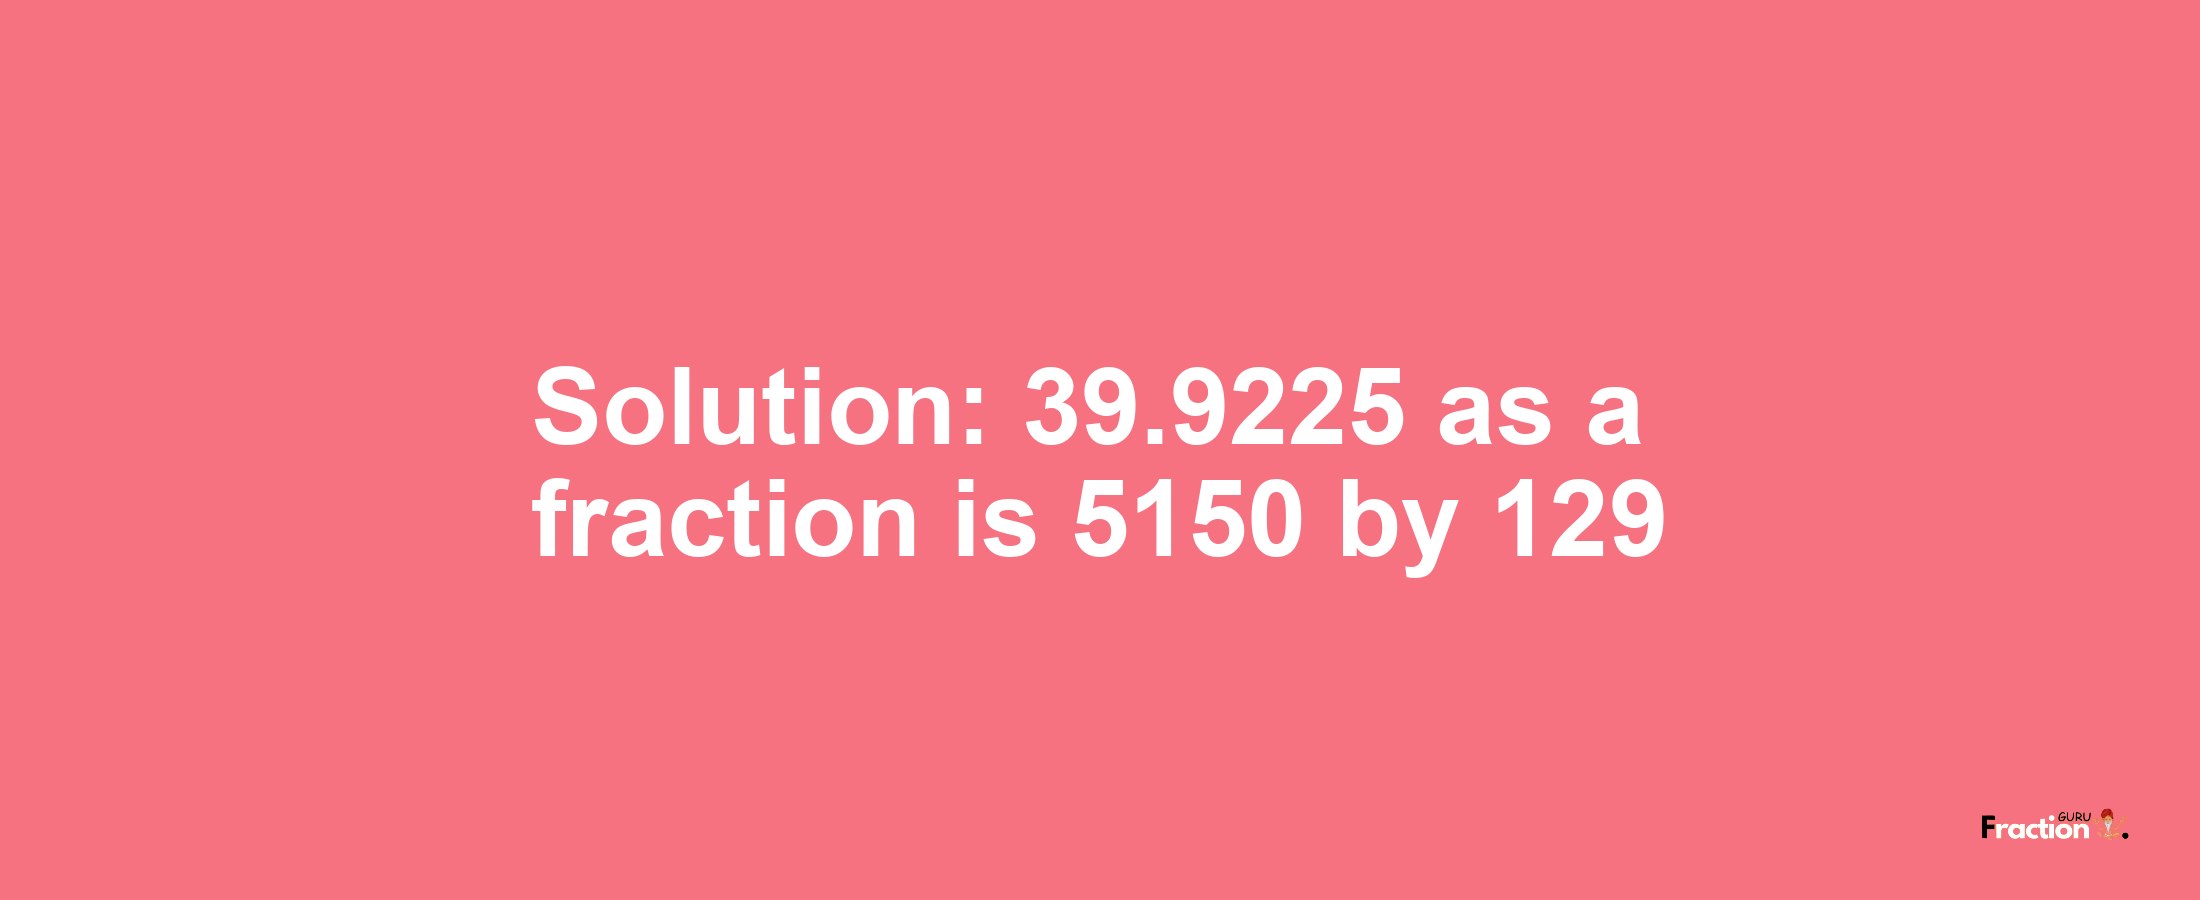 Solution:39.9225 as a fraction is 5150/129